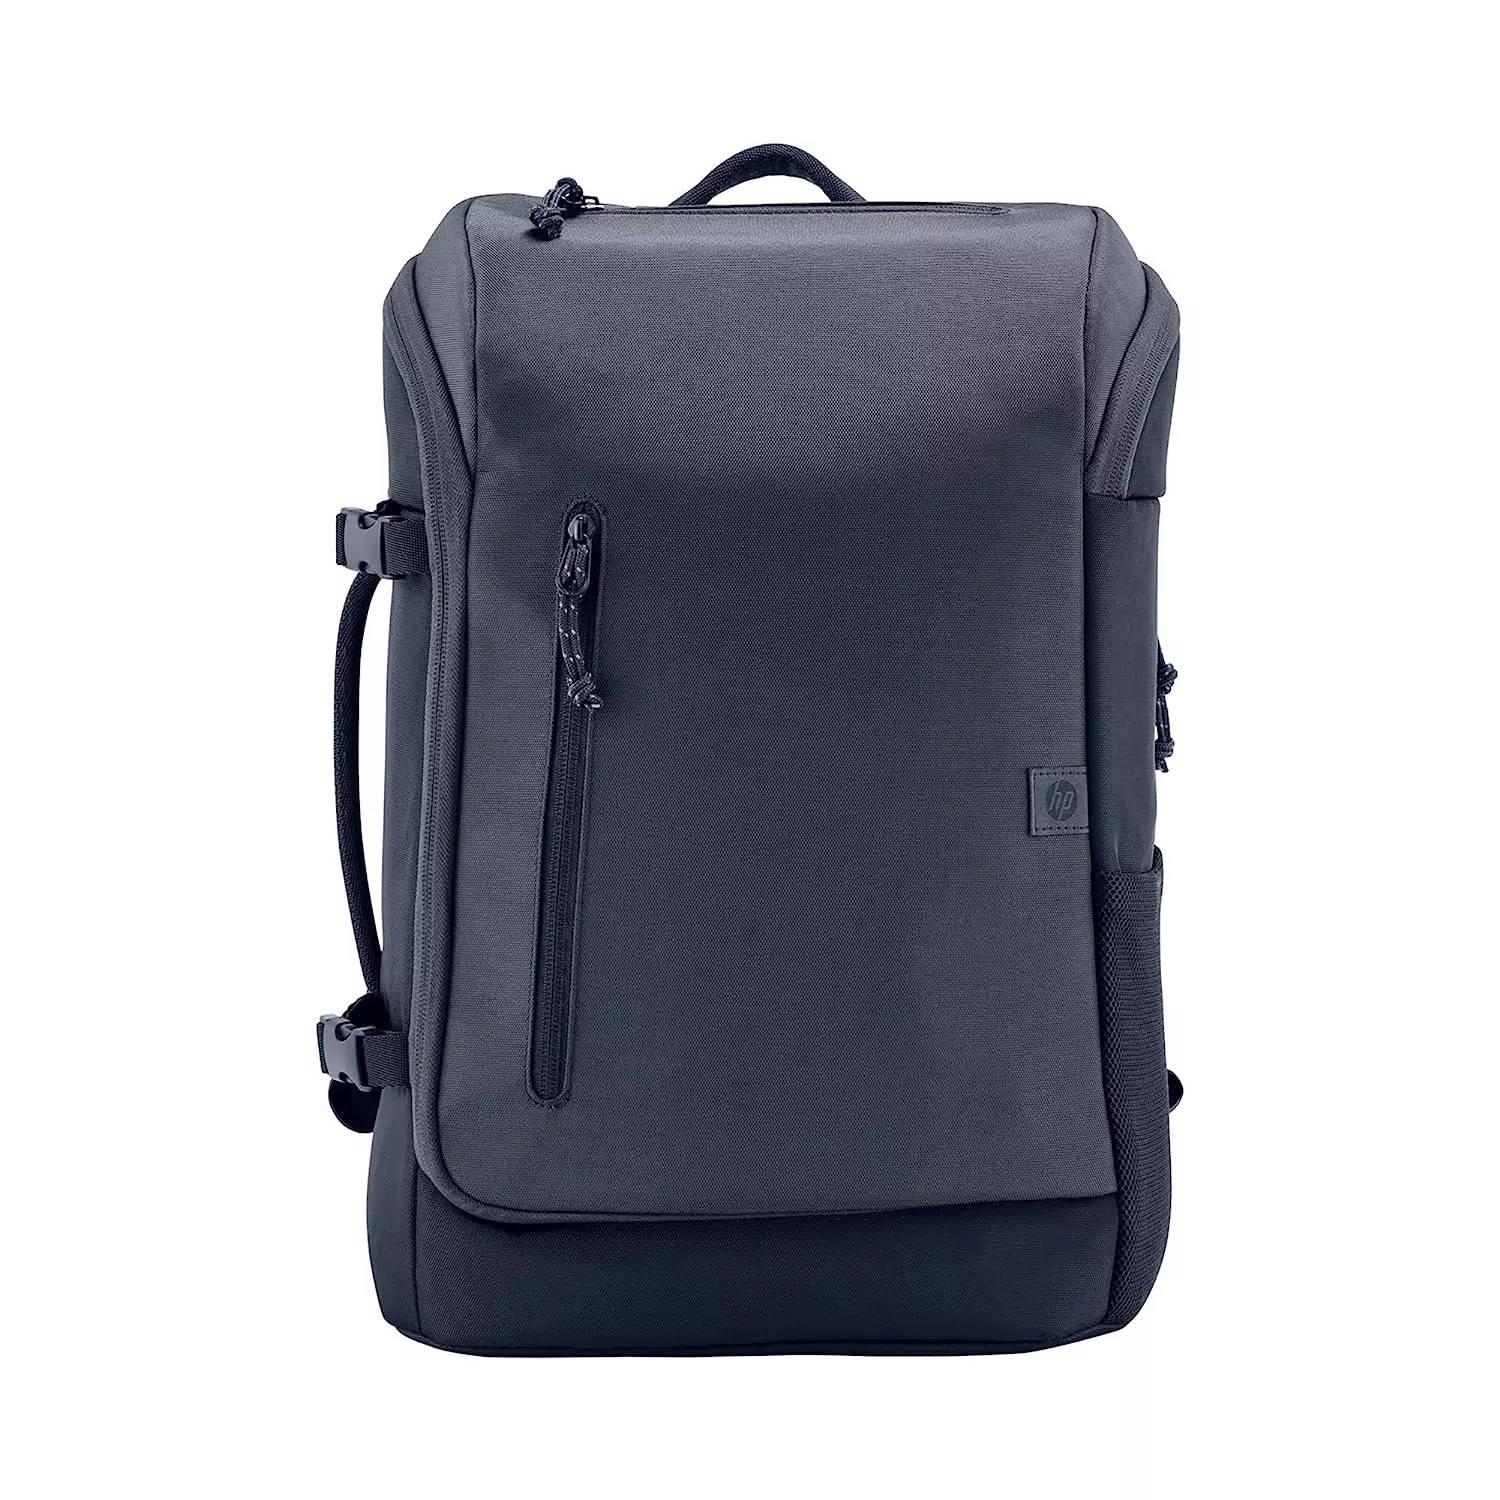 HP Laptop Bags: 6 Best HP Laptop Bags for Working Professionals in ...